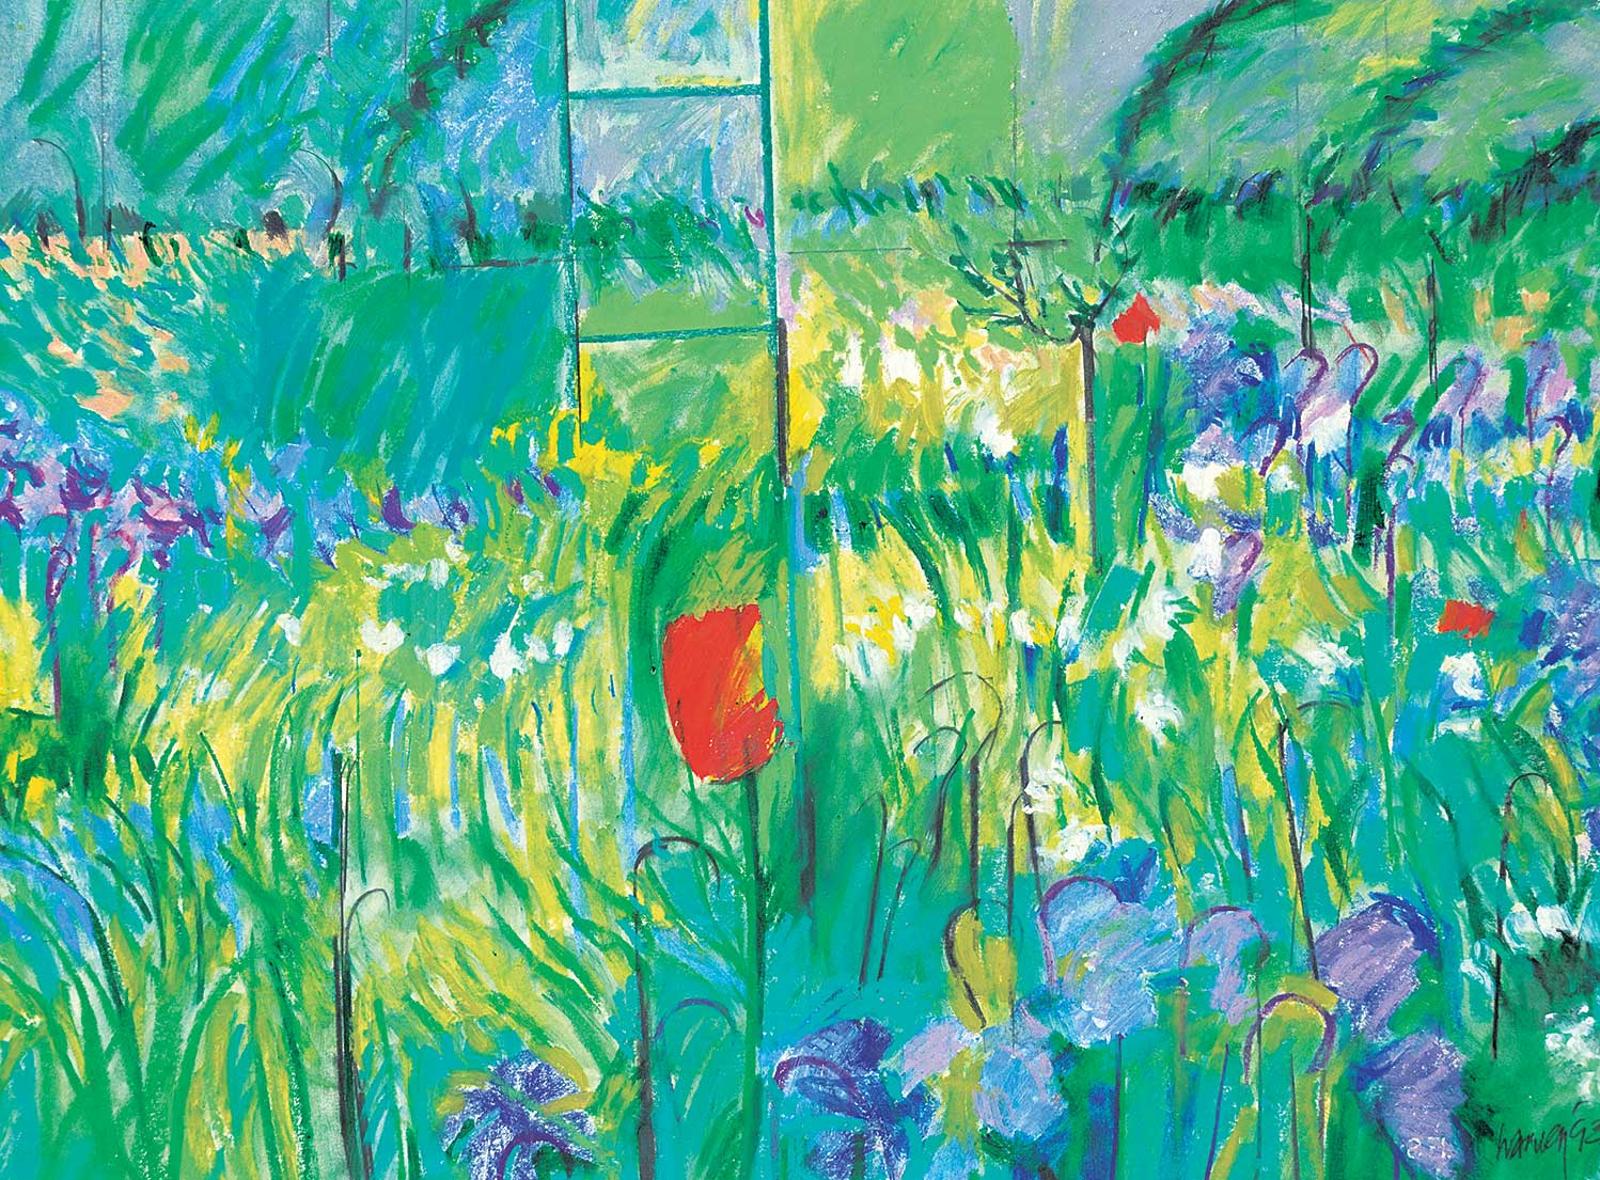 Donald Harvey (1930-2015) - Untitled - Flowers in the Greenhouse